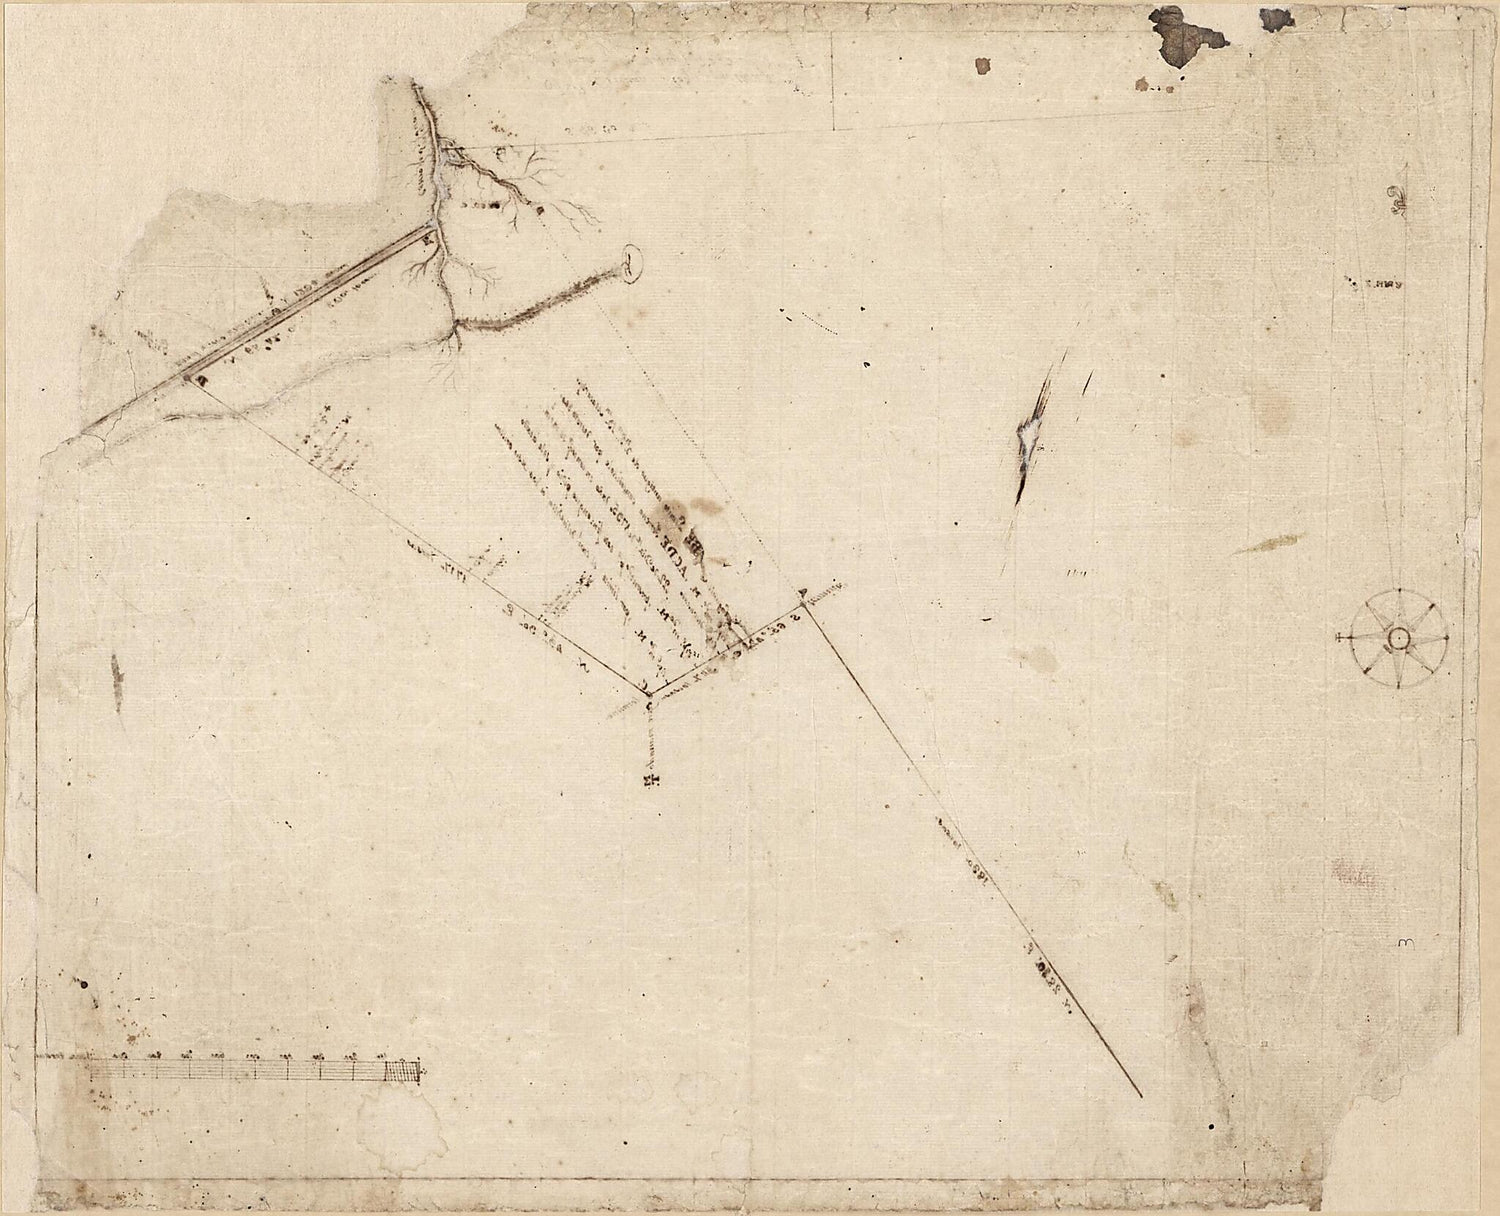 This old map of Map of a Portion of Bayou St. John, New Orleans from 1795 was created by Vicente Sebastián Pintado, Charles Laveau Trudeau in 1795